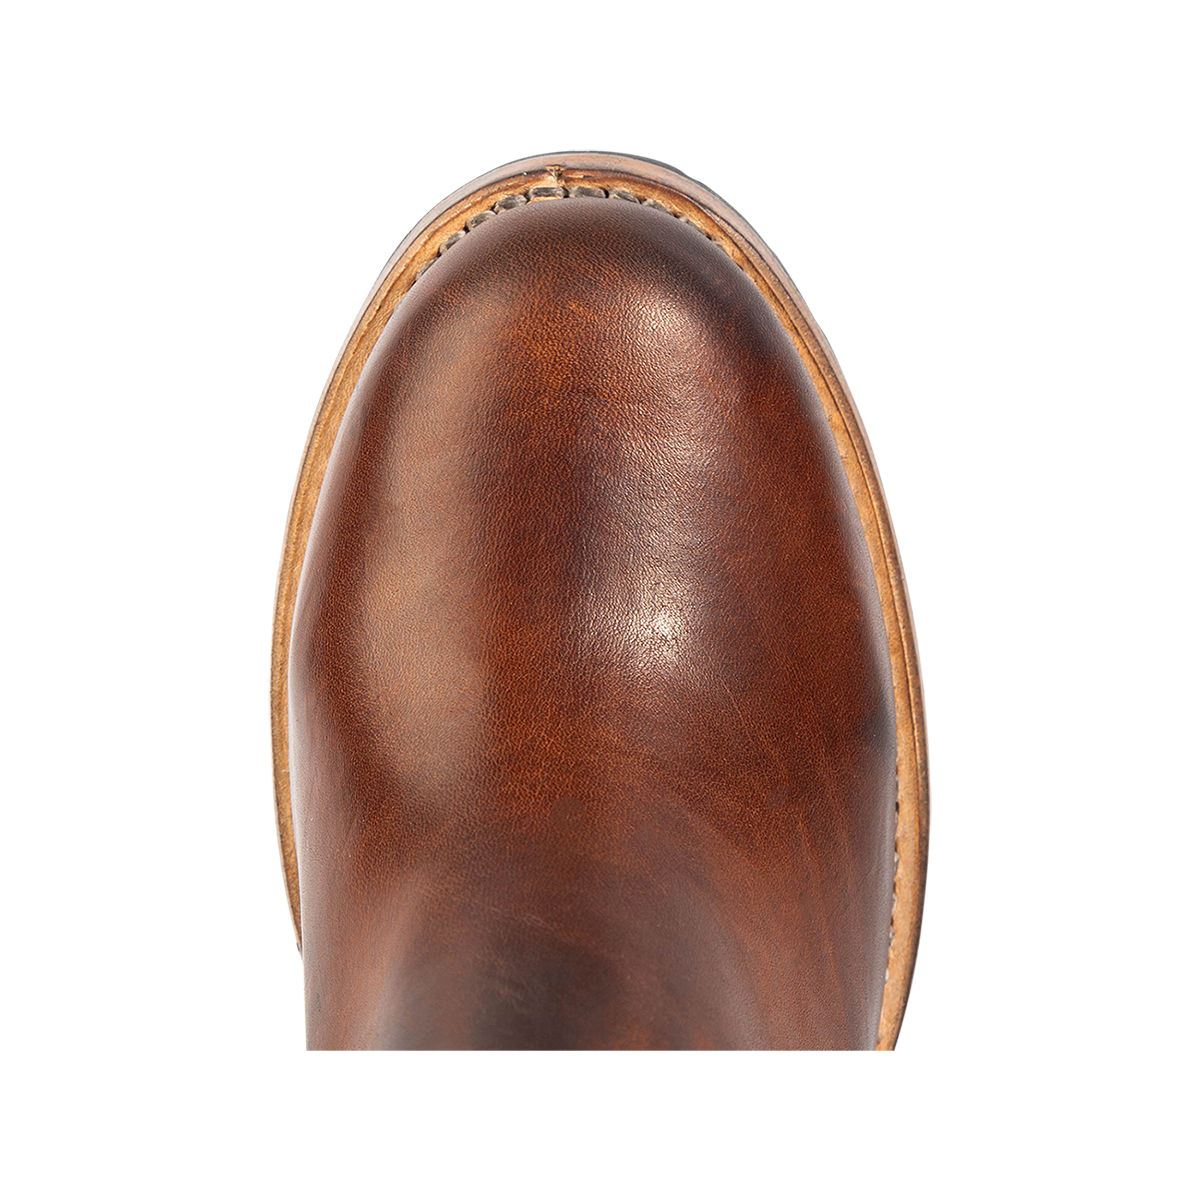 Top view showing a rounded toe and 100% full grain leather on FREEBIRD women's Neverland tan leather bootie